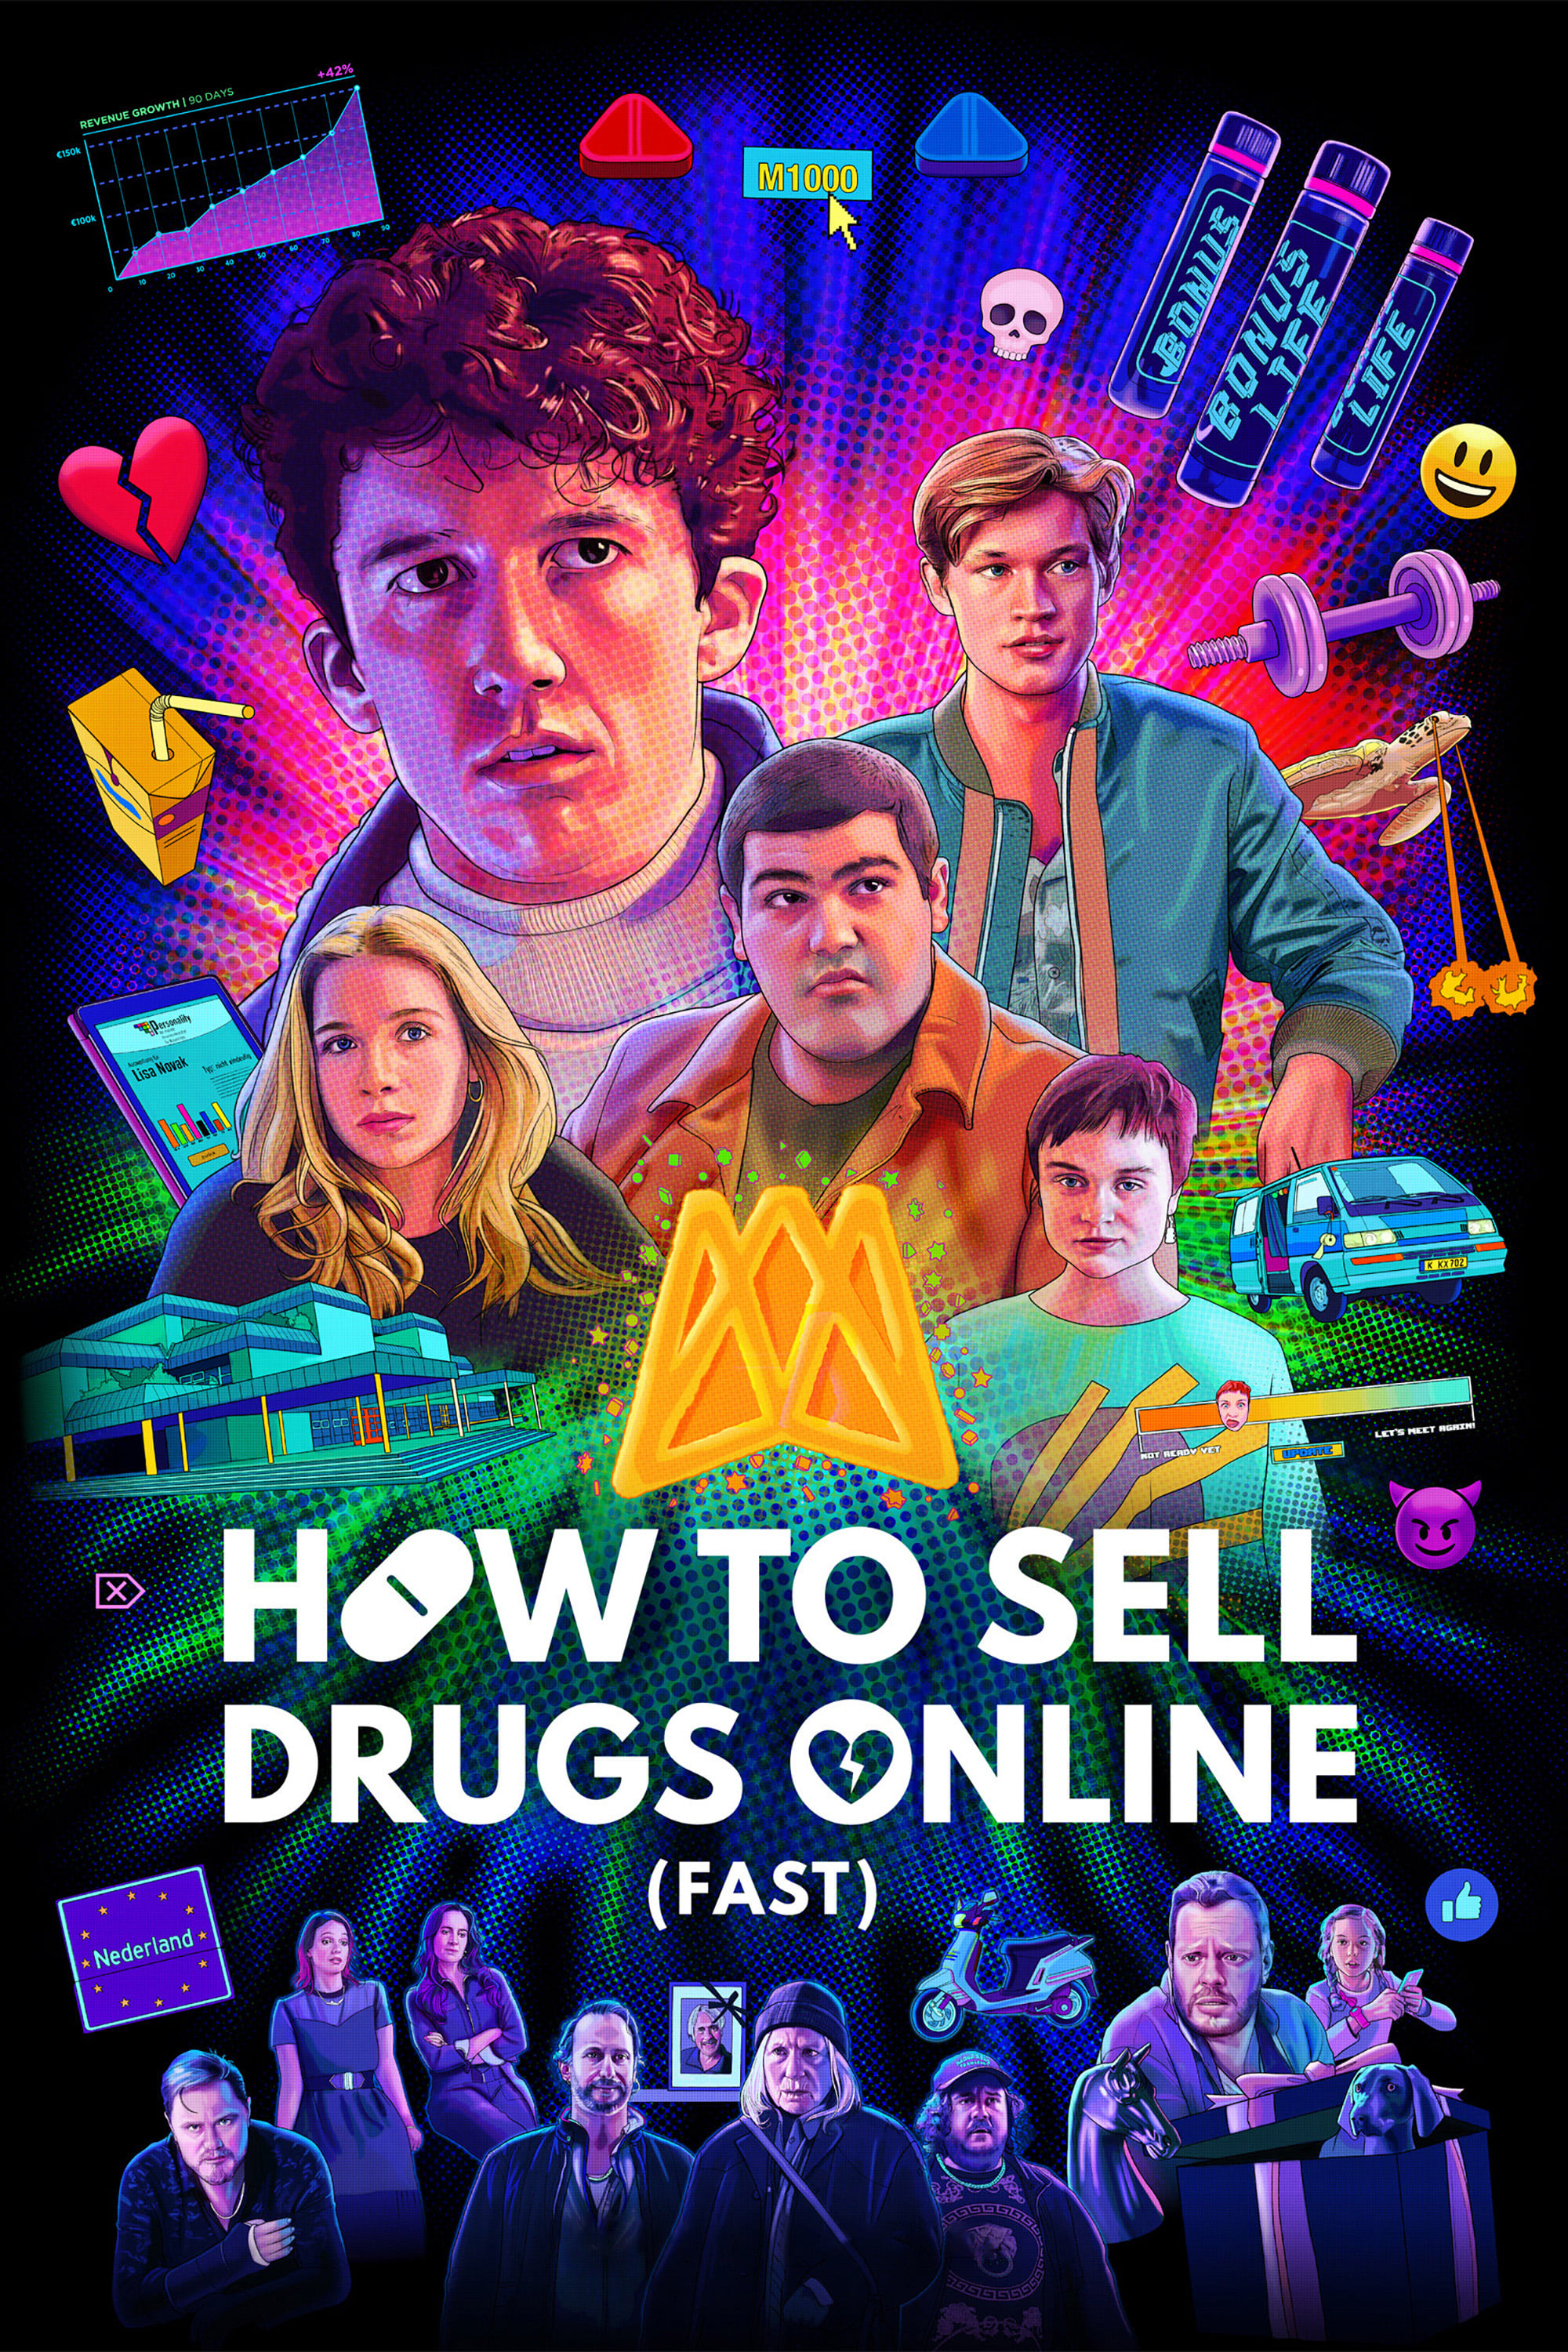 How to Sell Drugs Online (Fast) rating